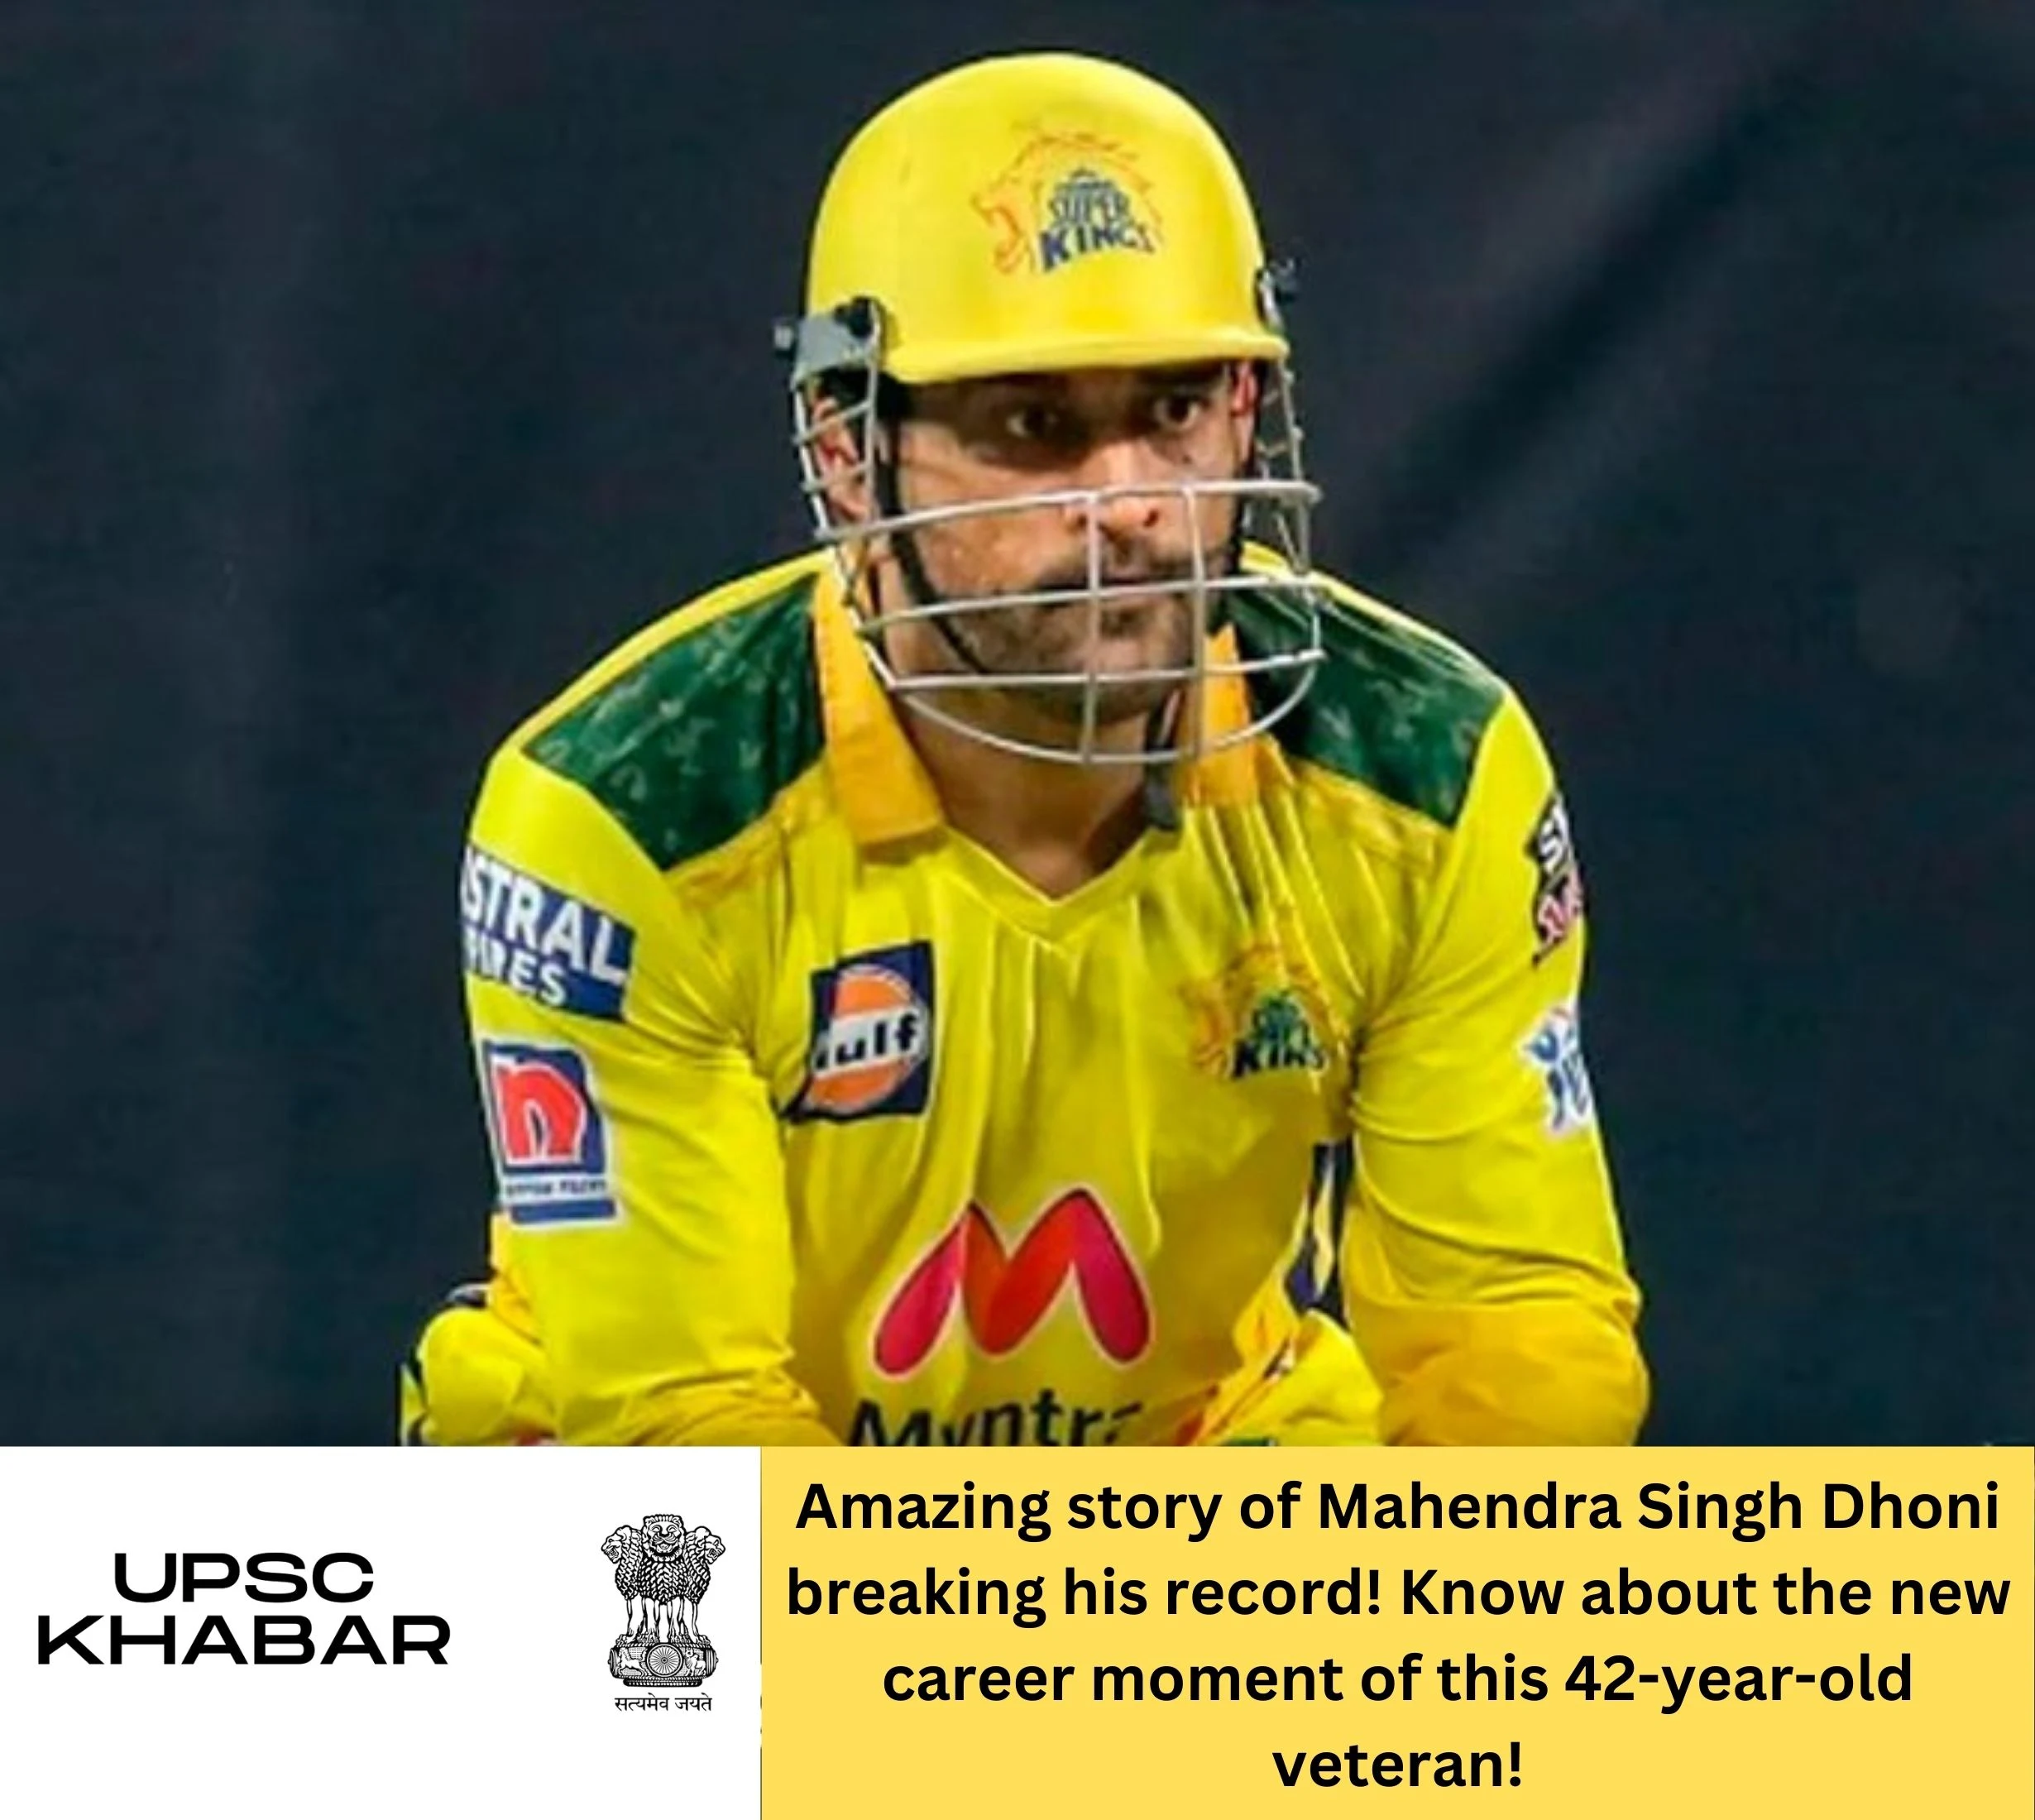 Amazing story of Mahendra Singh Dhoni breaking his record! Know about the new career moment of this 42-year-old veteran!